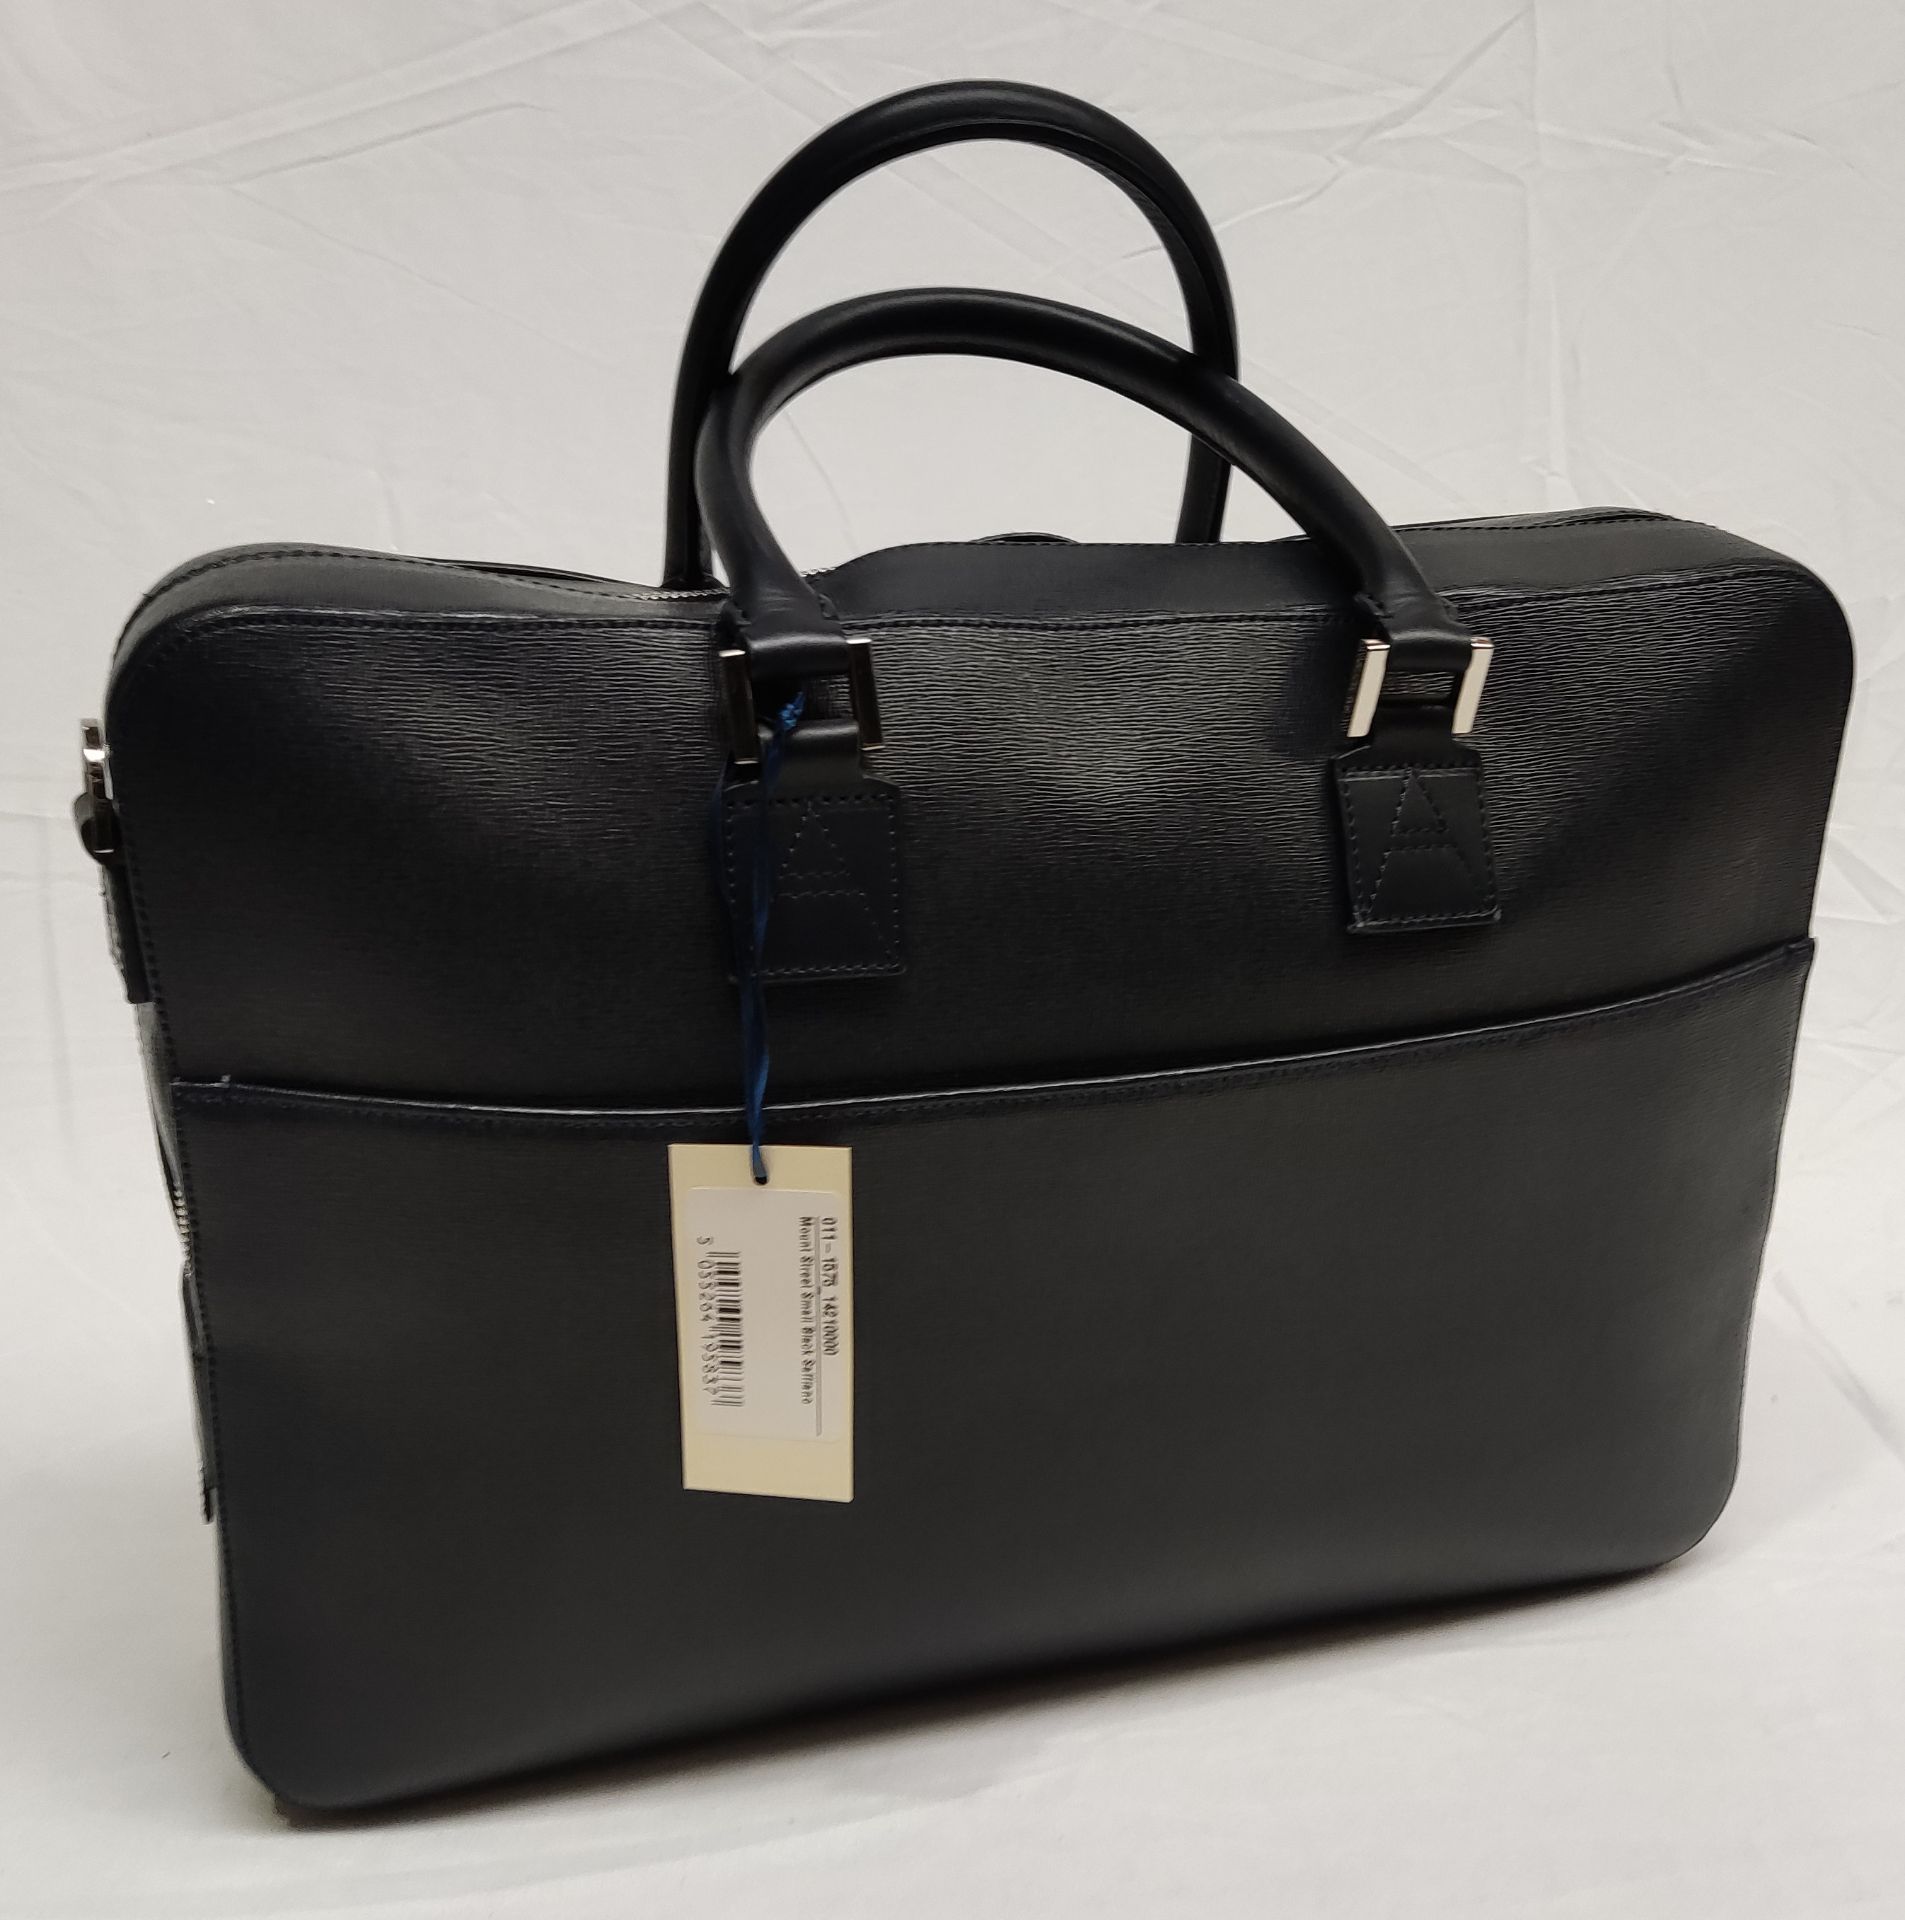 1 x ASPINAL OF LONDON Mount Street Small Laptop Bag In Black Saffiano - Original RRP £650.00 - Image 9 of 21